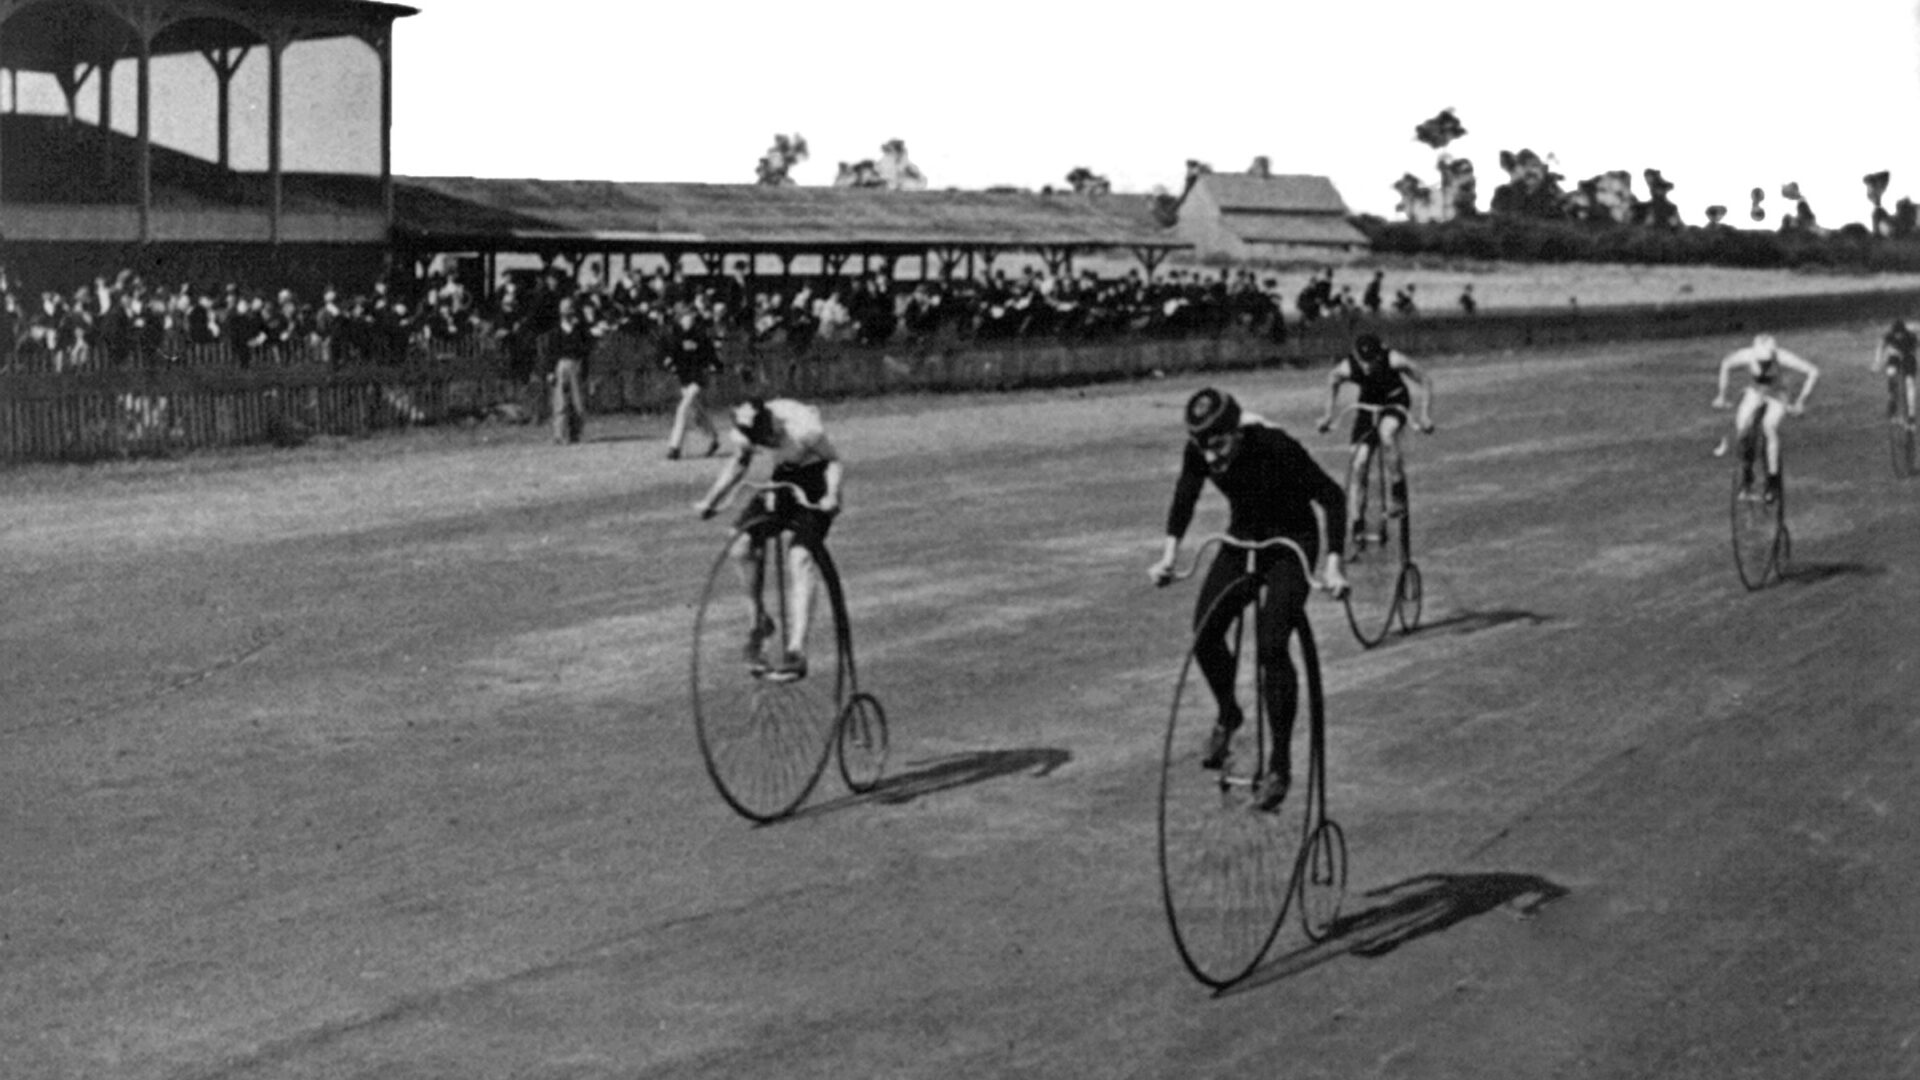 Black and white historical photos of cyclists racing on boneshaker bikes